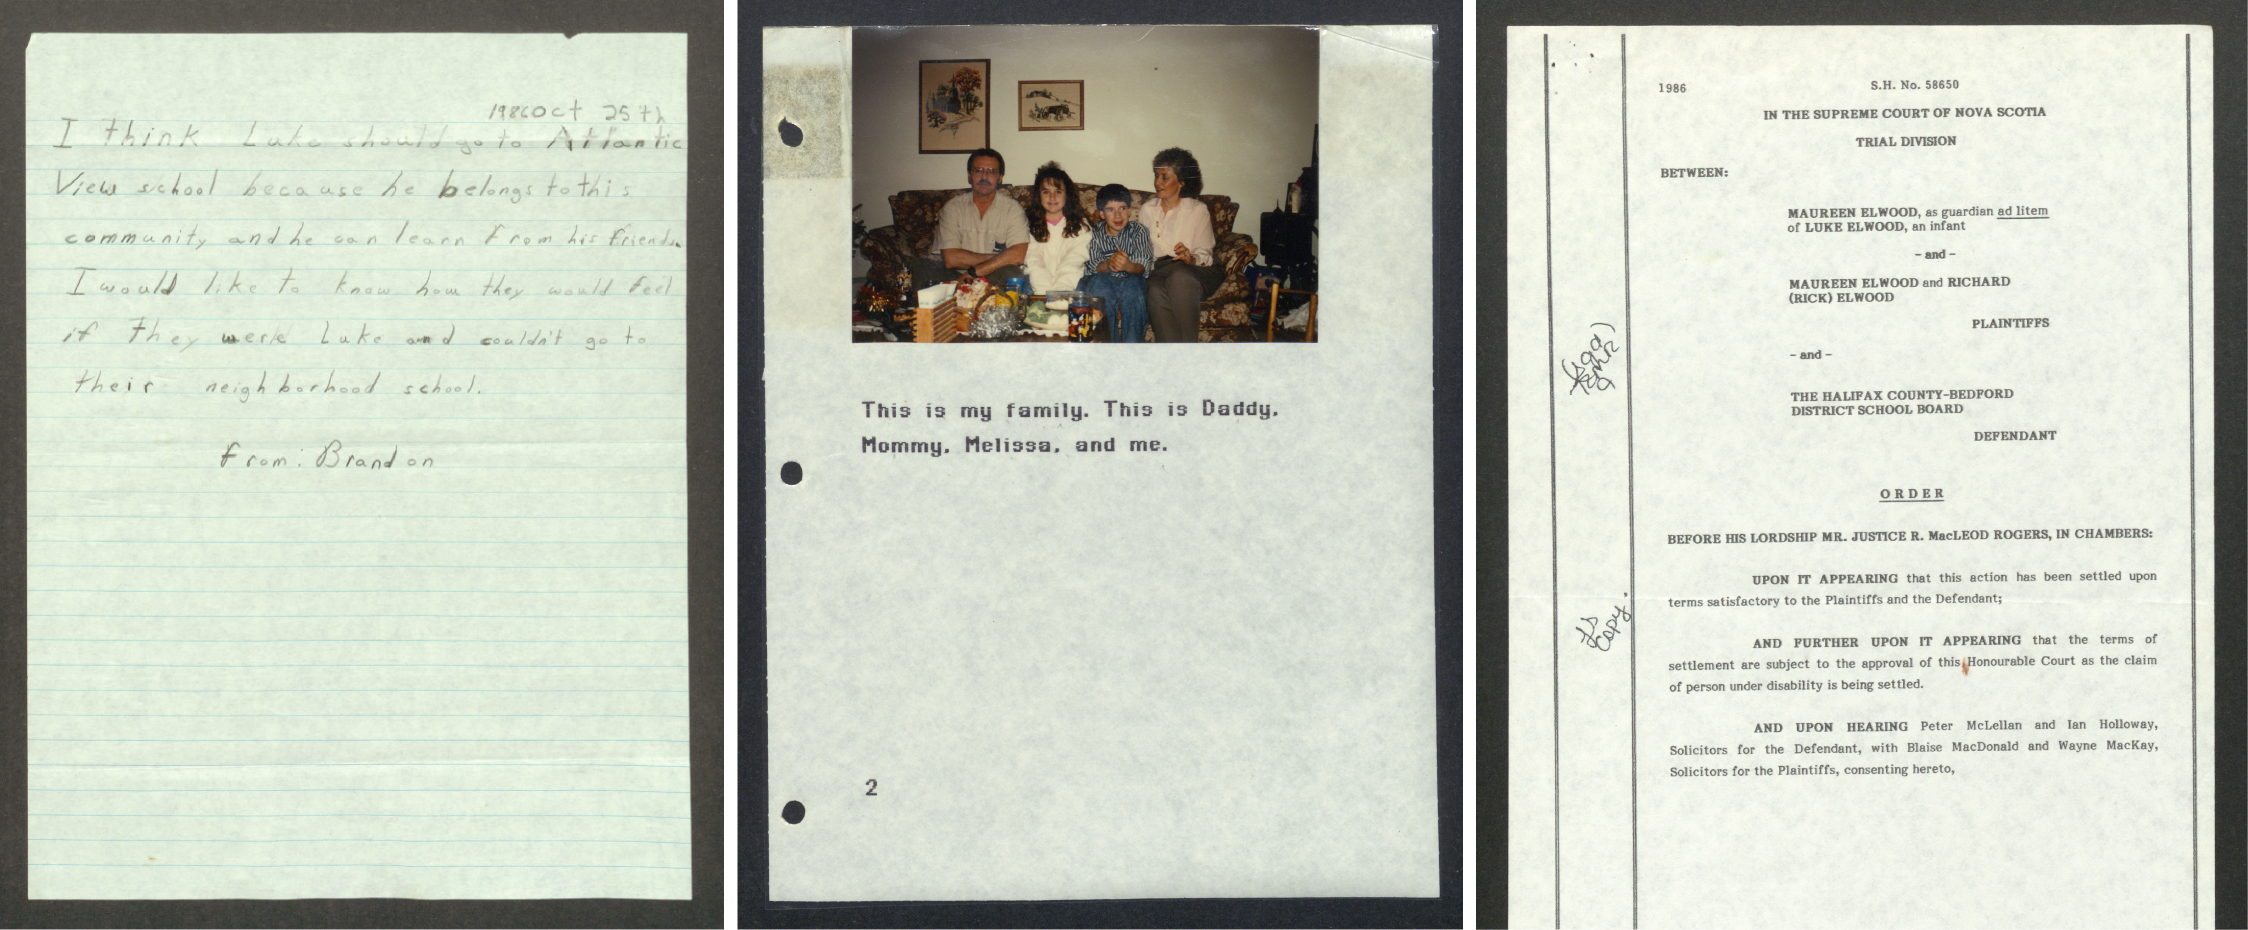 A graphic combining three images from the Luke Elwood fonds: a handwritten later, a family photo, and a court document.